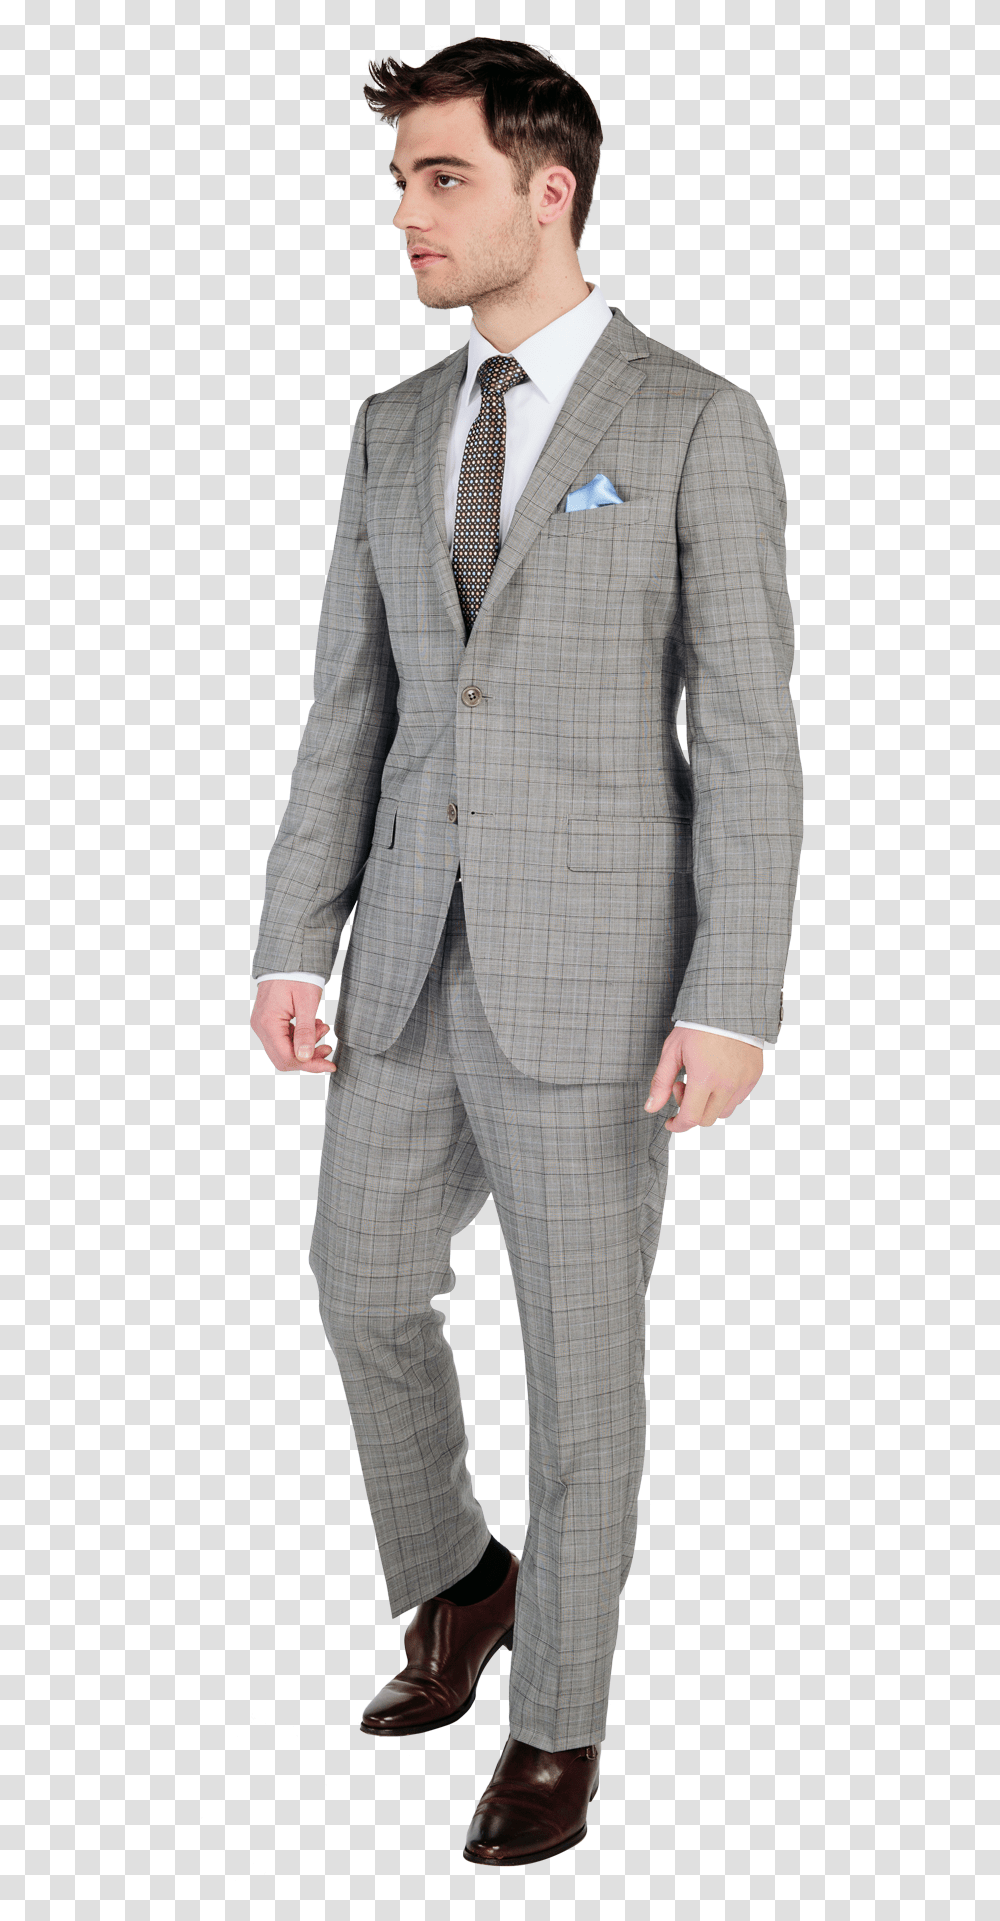 Full Body Businessman Business Man Full Body Free, Apparel, Suit, Overcoat Transparent Png